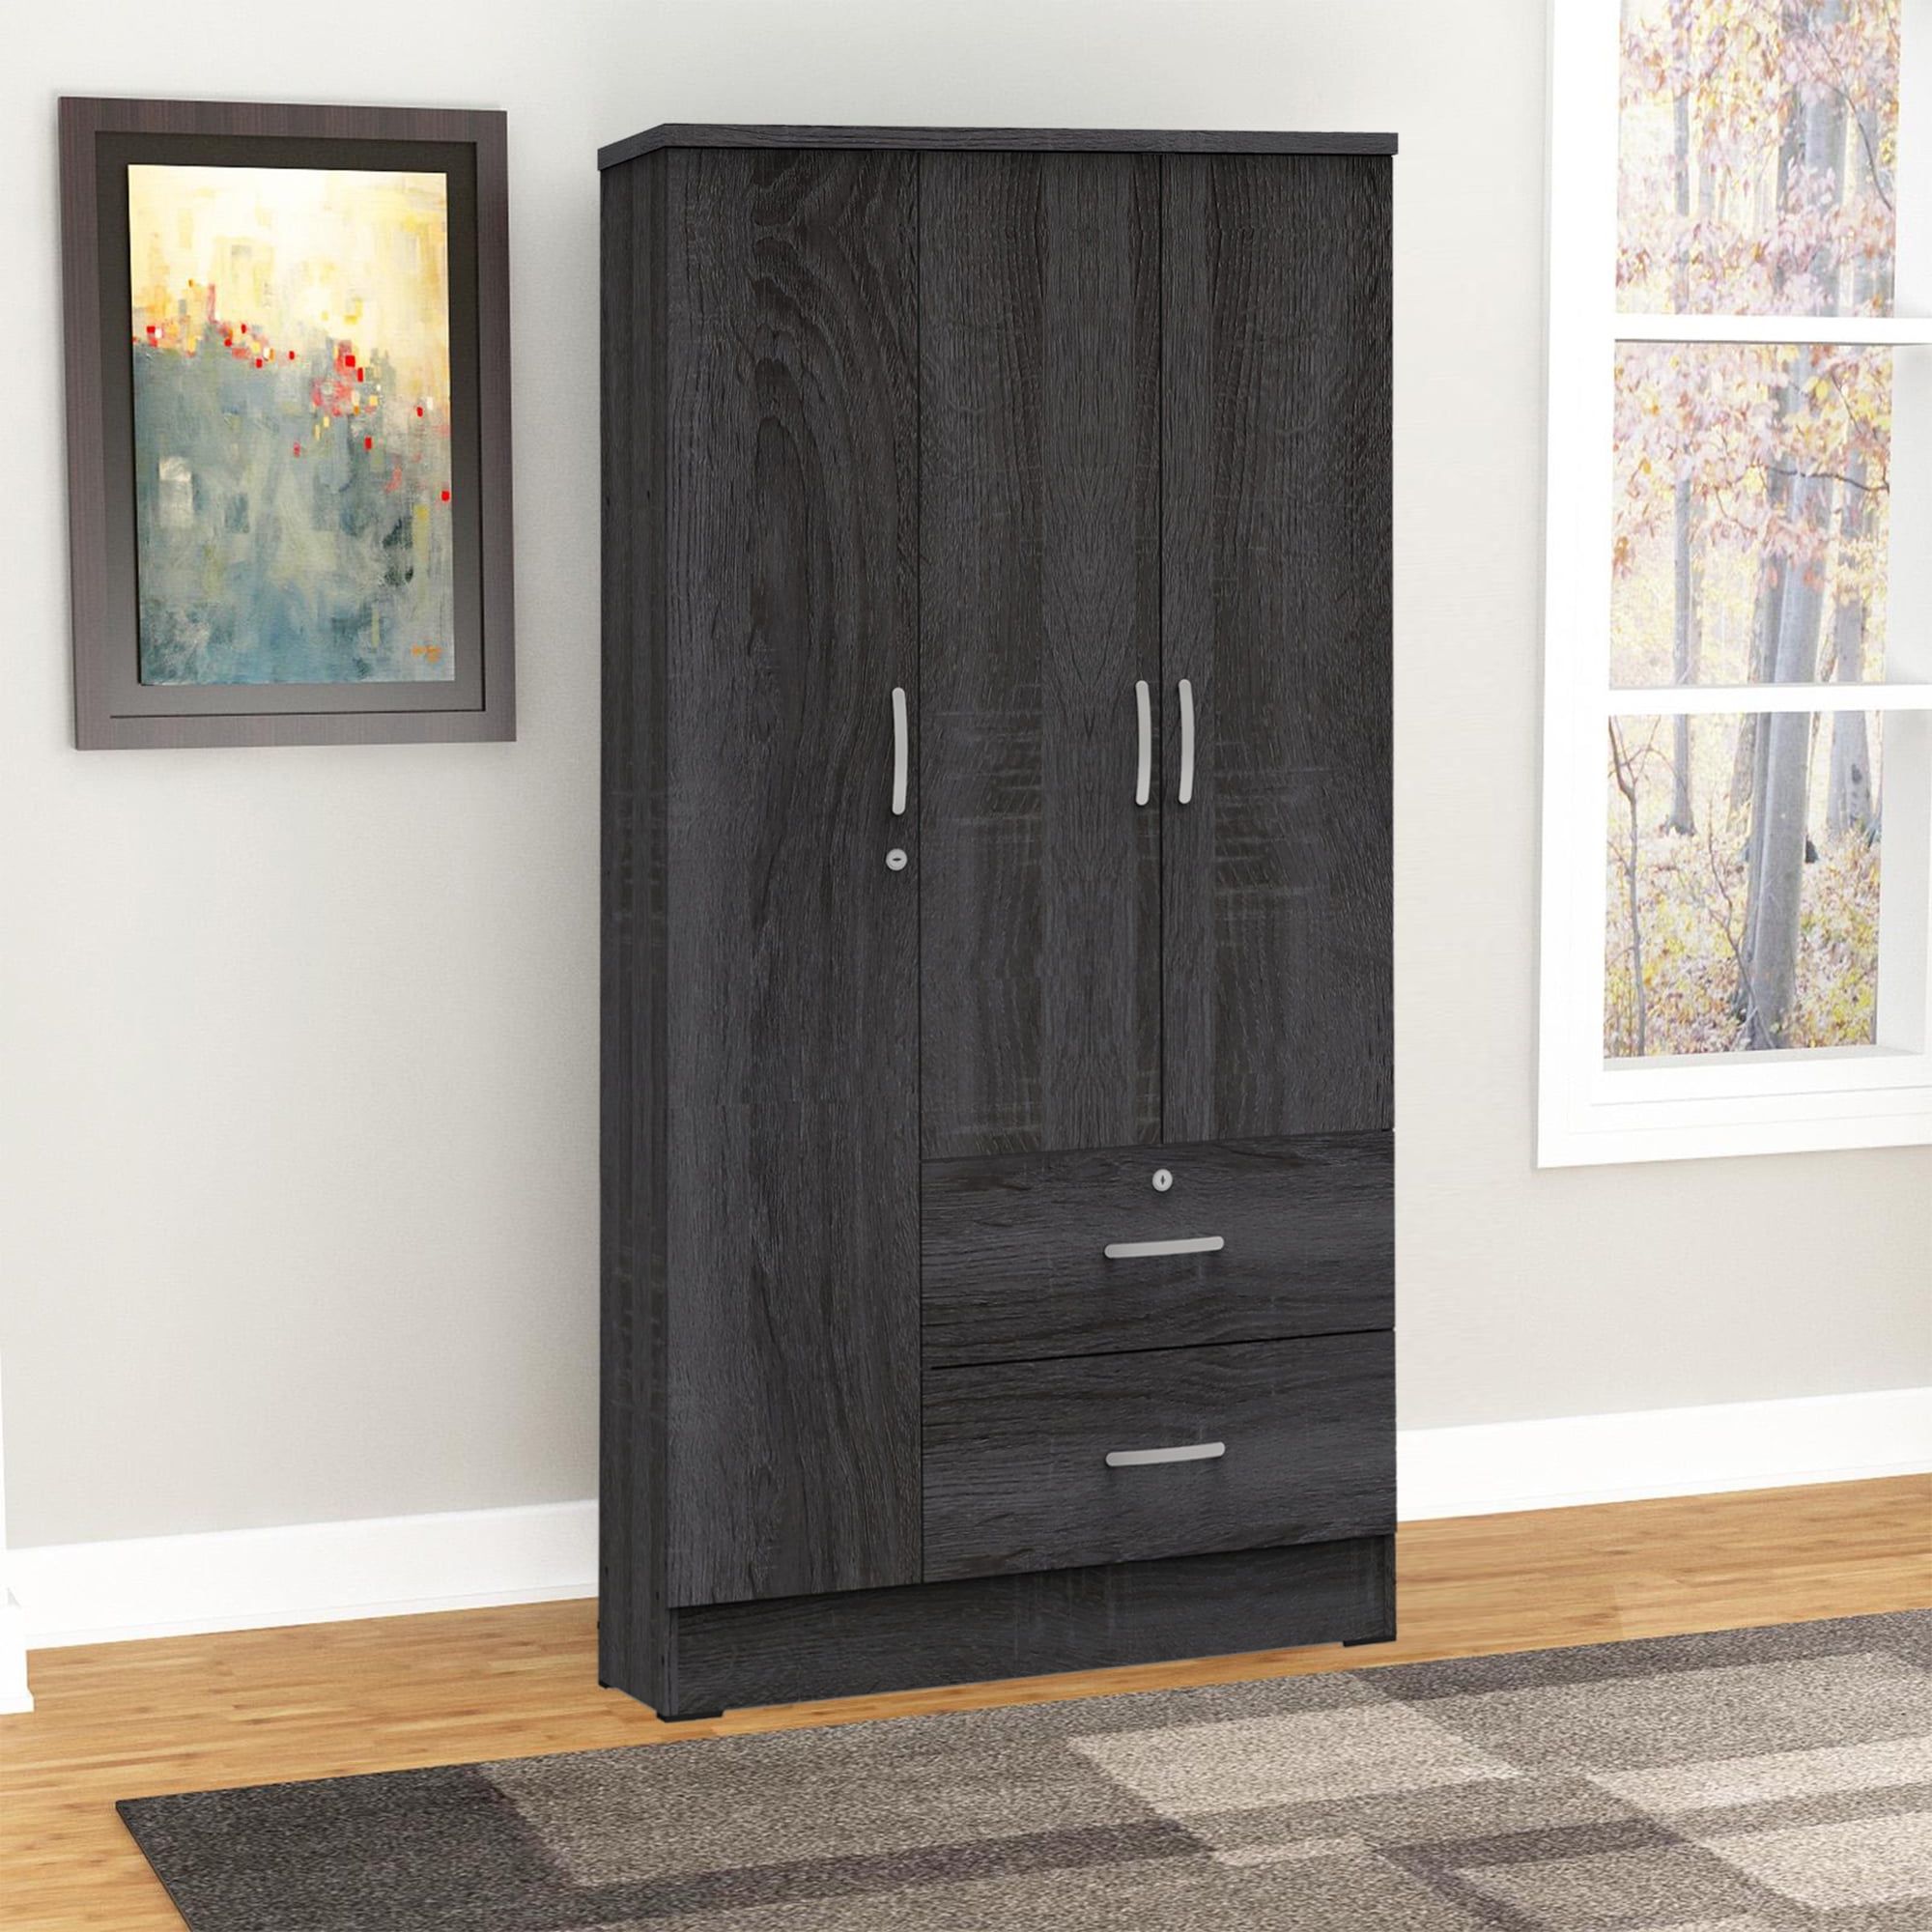 Better Home Products Symphony Wardrobe Armoire Closet With Two Drawers  Mahogany – Walmart Throughout Cameo 2 Door Wardrobes (View 14 of 20)